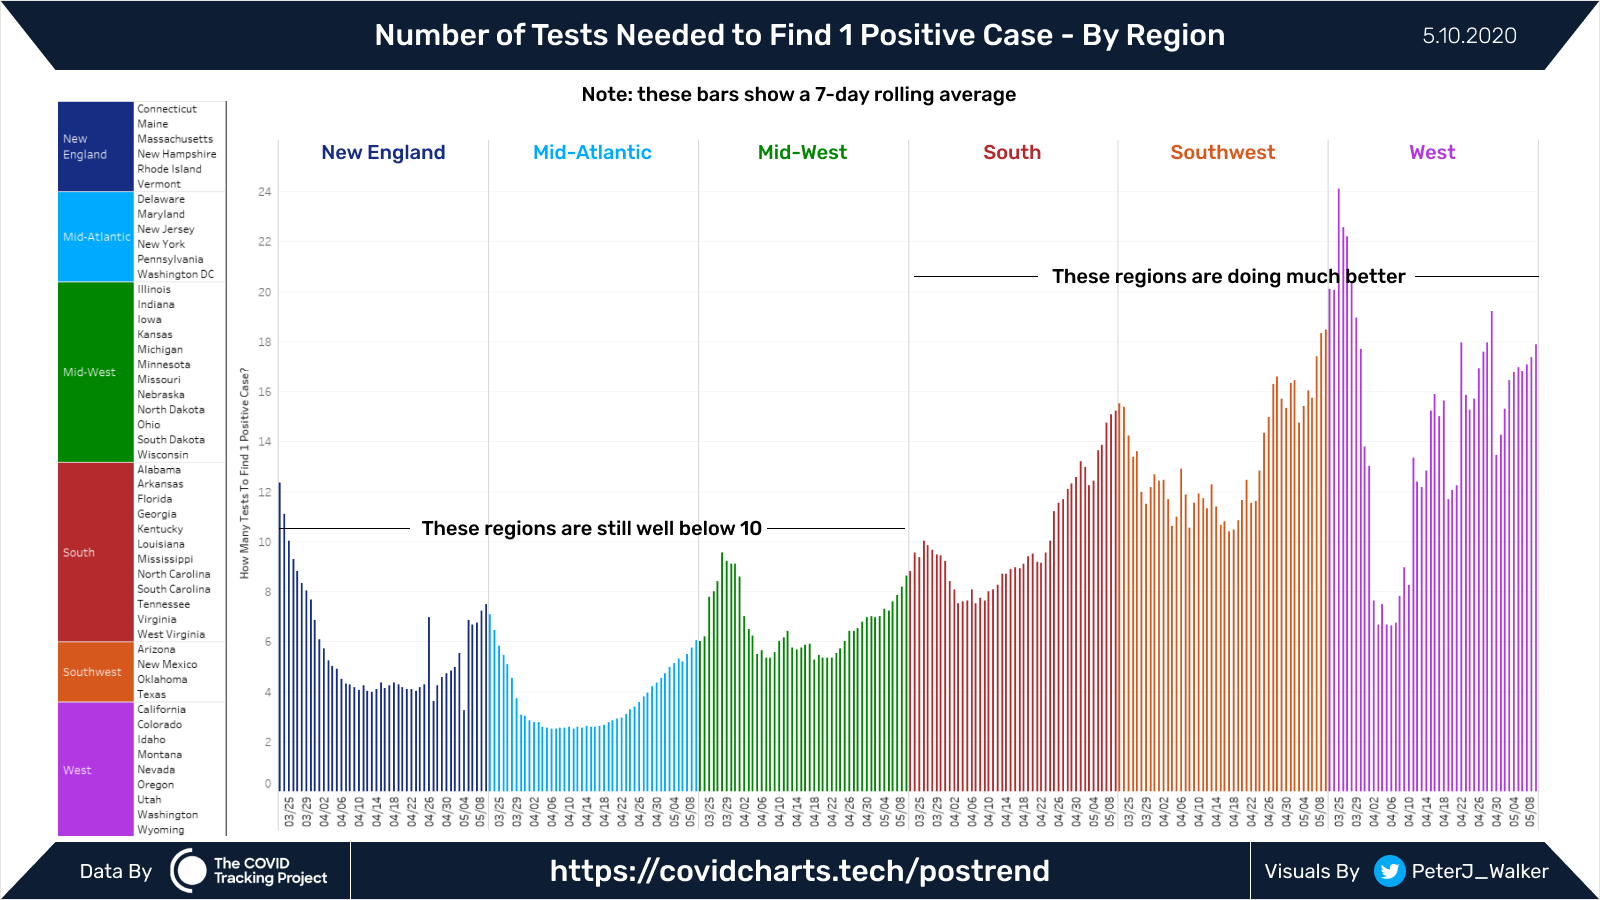 Peter Walker - Number of Test Needed to Find 1 Positive Case - By Region